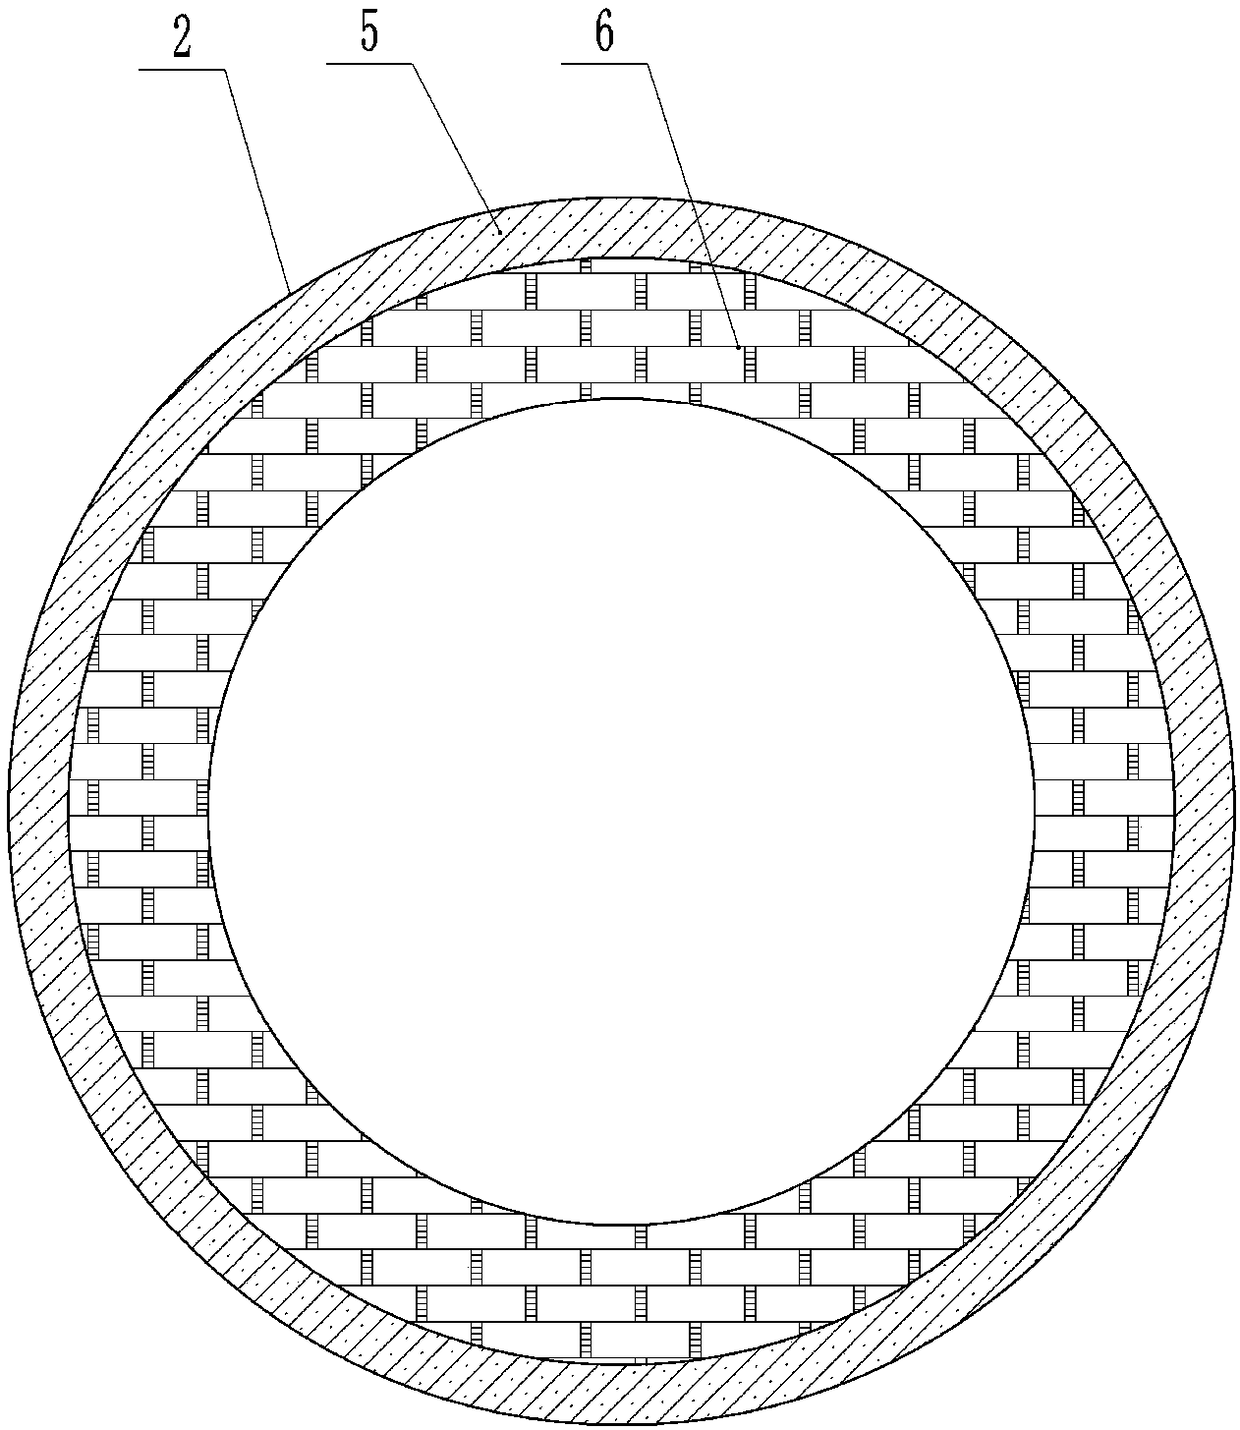 Rotary kiln structure